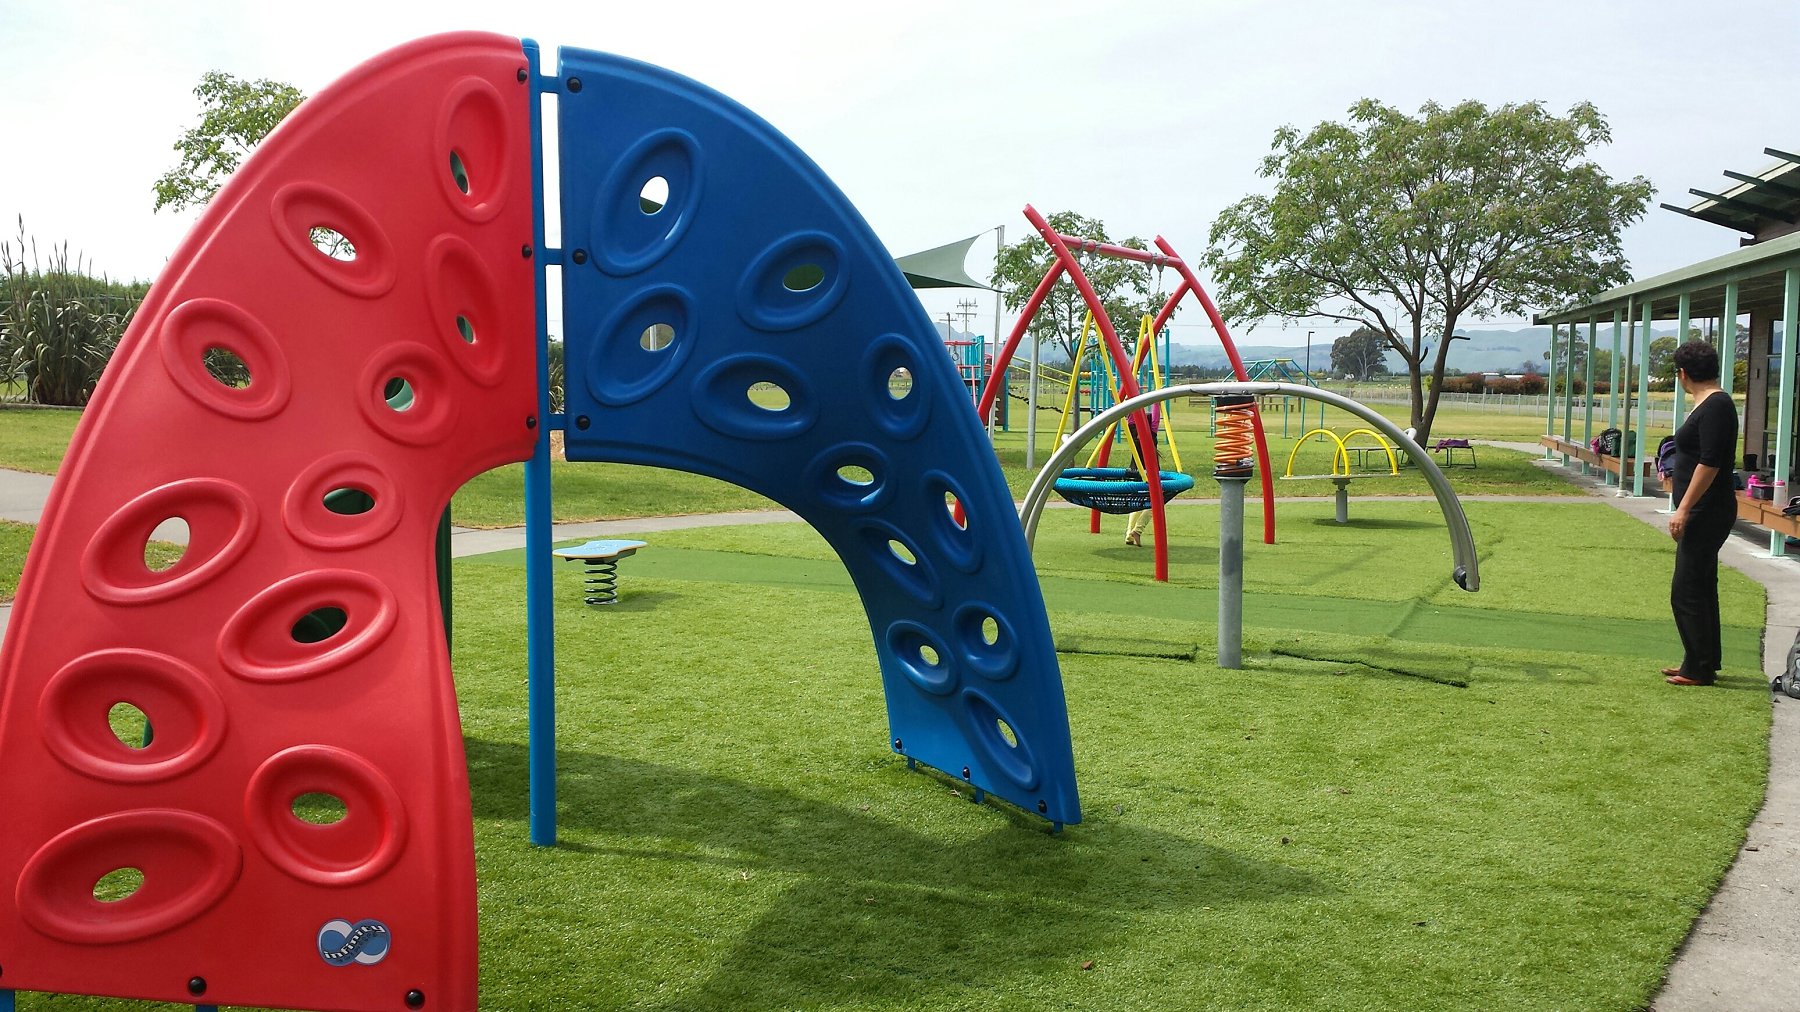 ARTIFICIAL GRASS FOR CHILDREN'S PLAY AREA